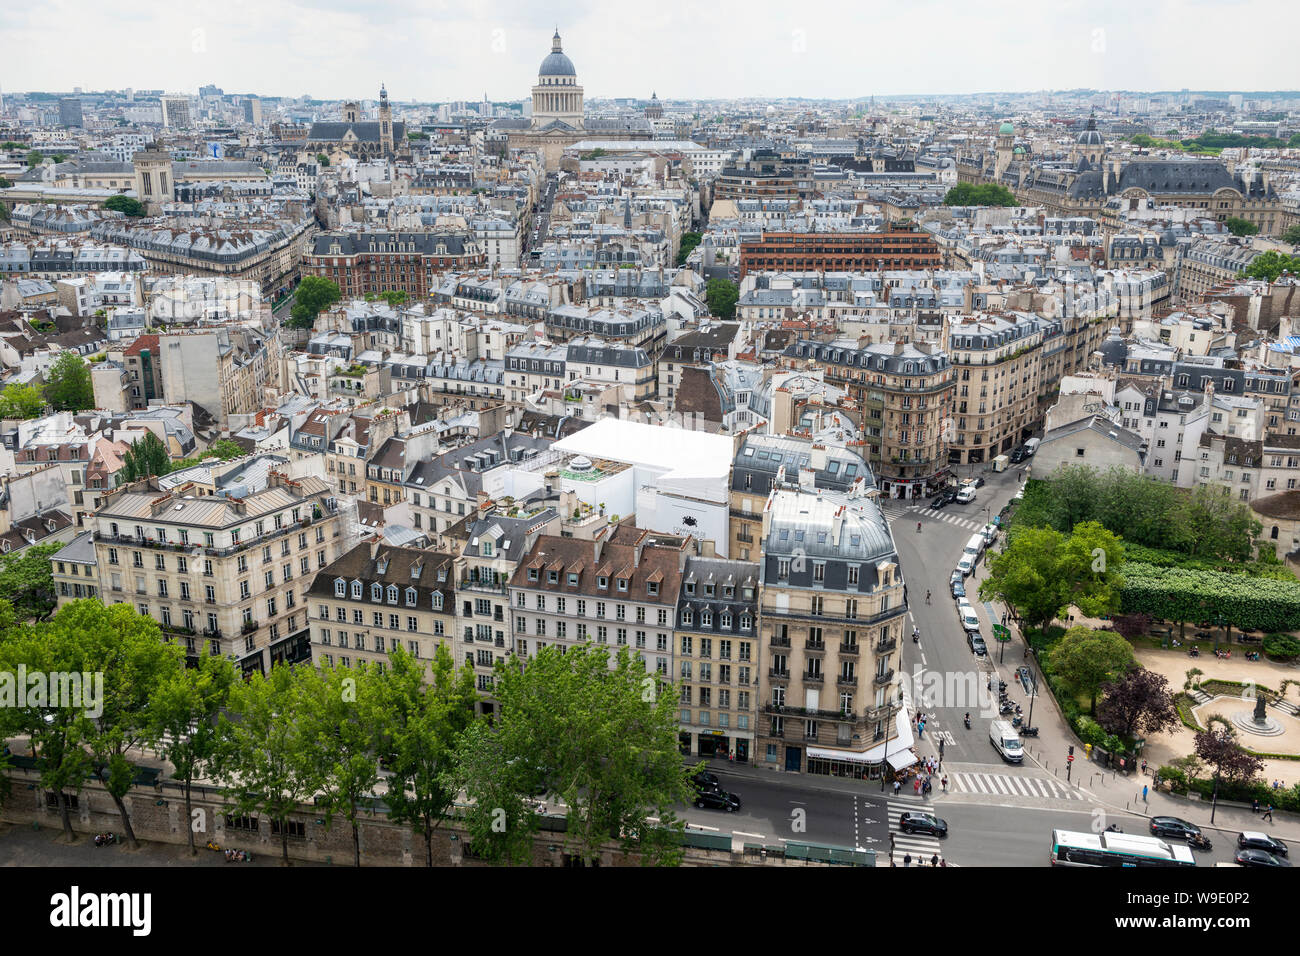 Aerial view looking south across Latin Quarter from viewing platform on South Tower of Notre-Dame Cathedral, Ile de la Cité, Paris, France Stock Photo